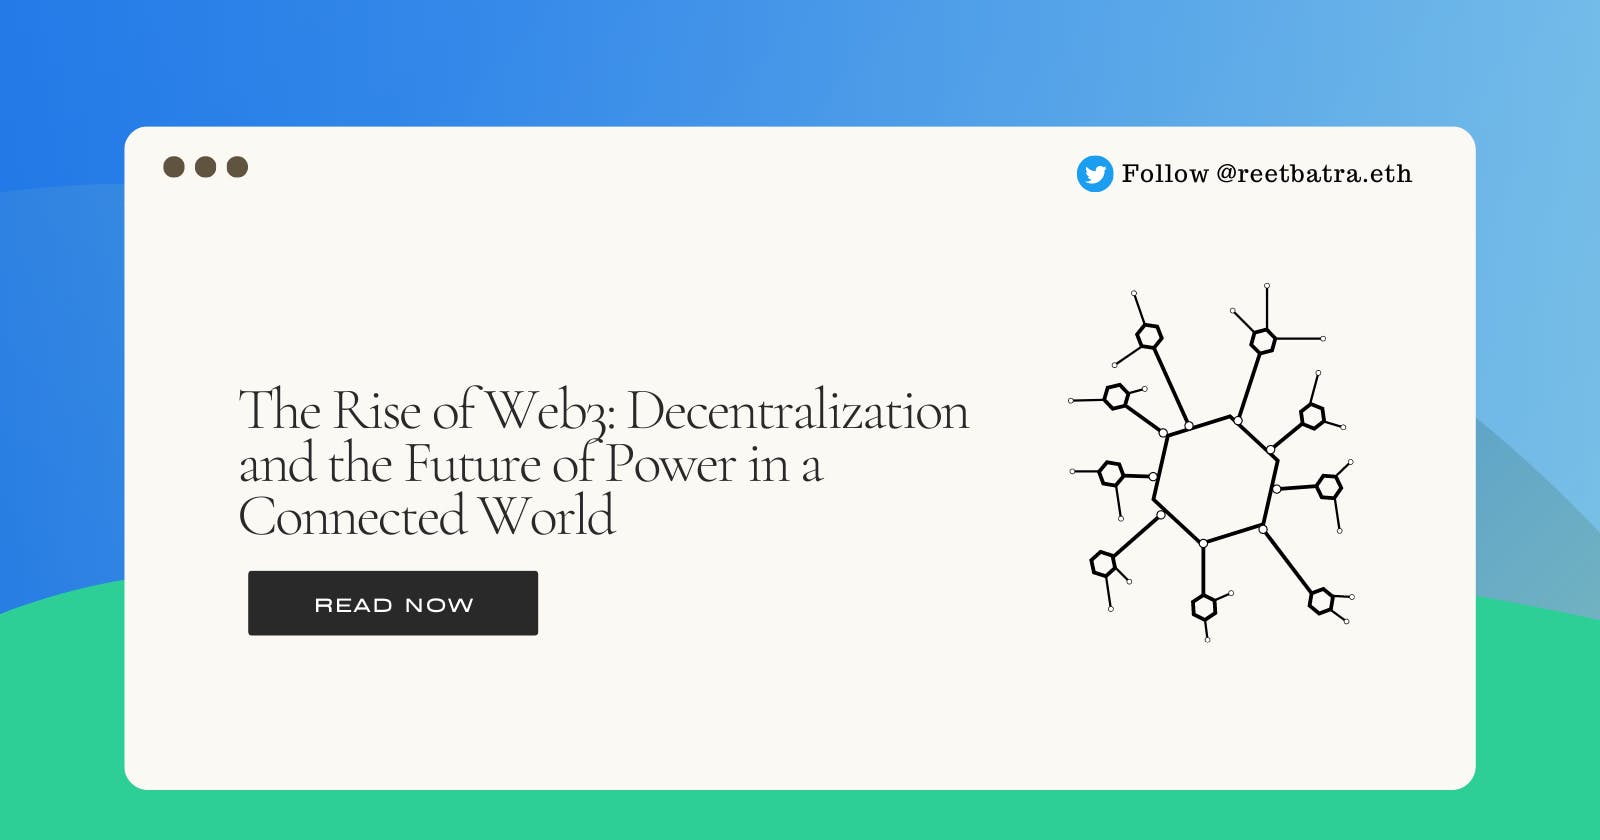 The Rise of Web3: Decentralization and the Future of Power in a Connected World